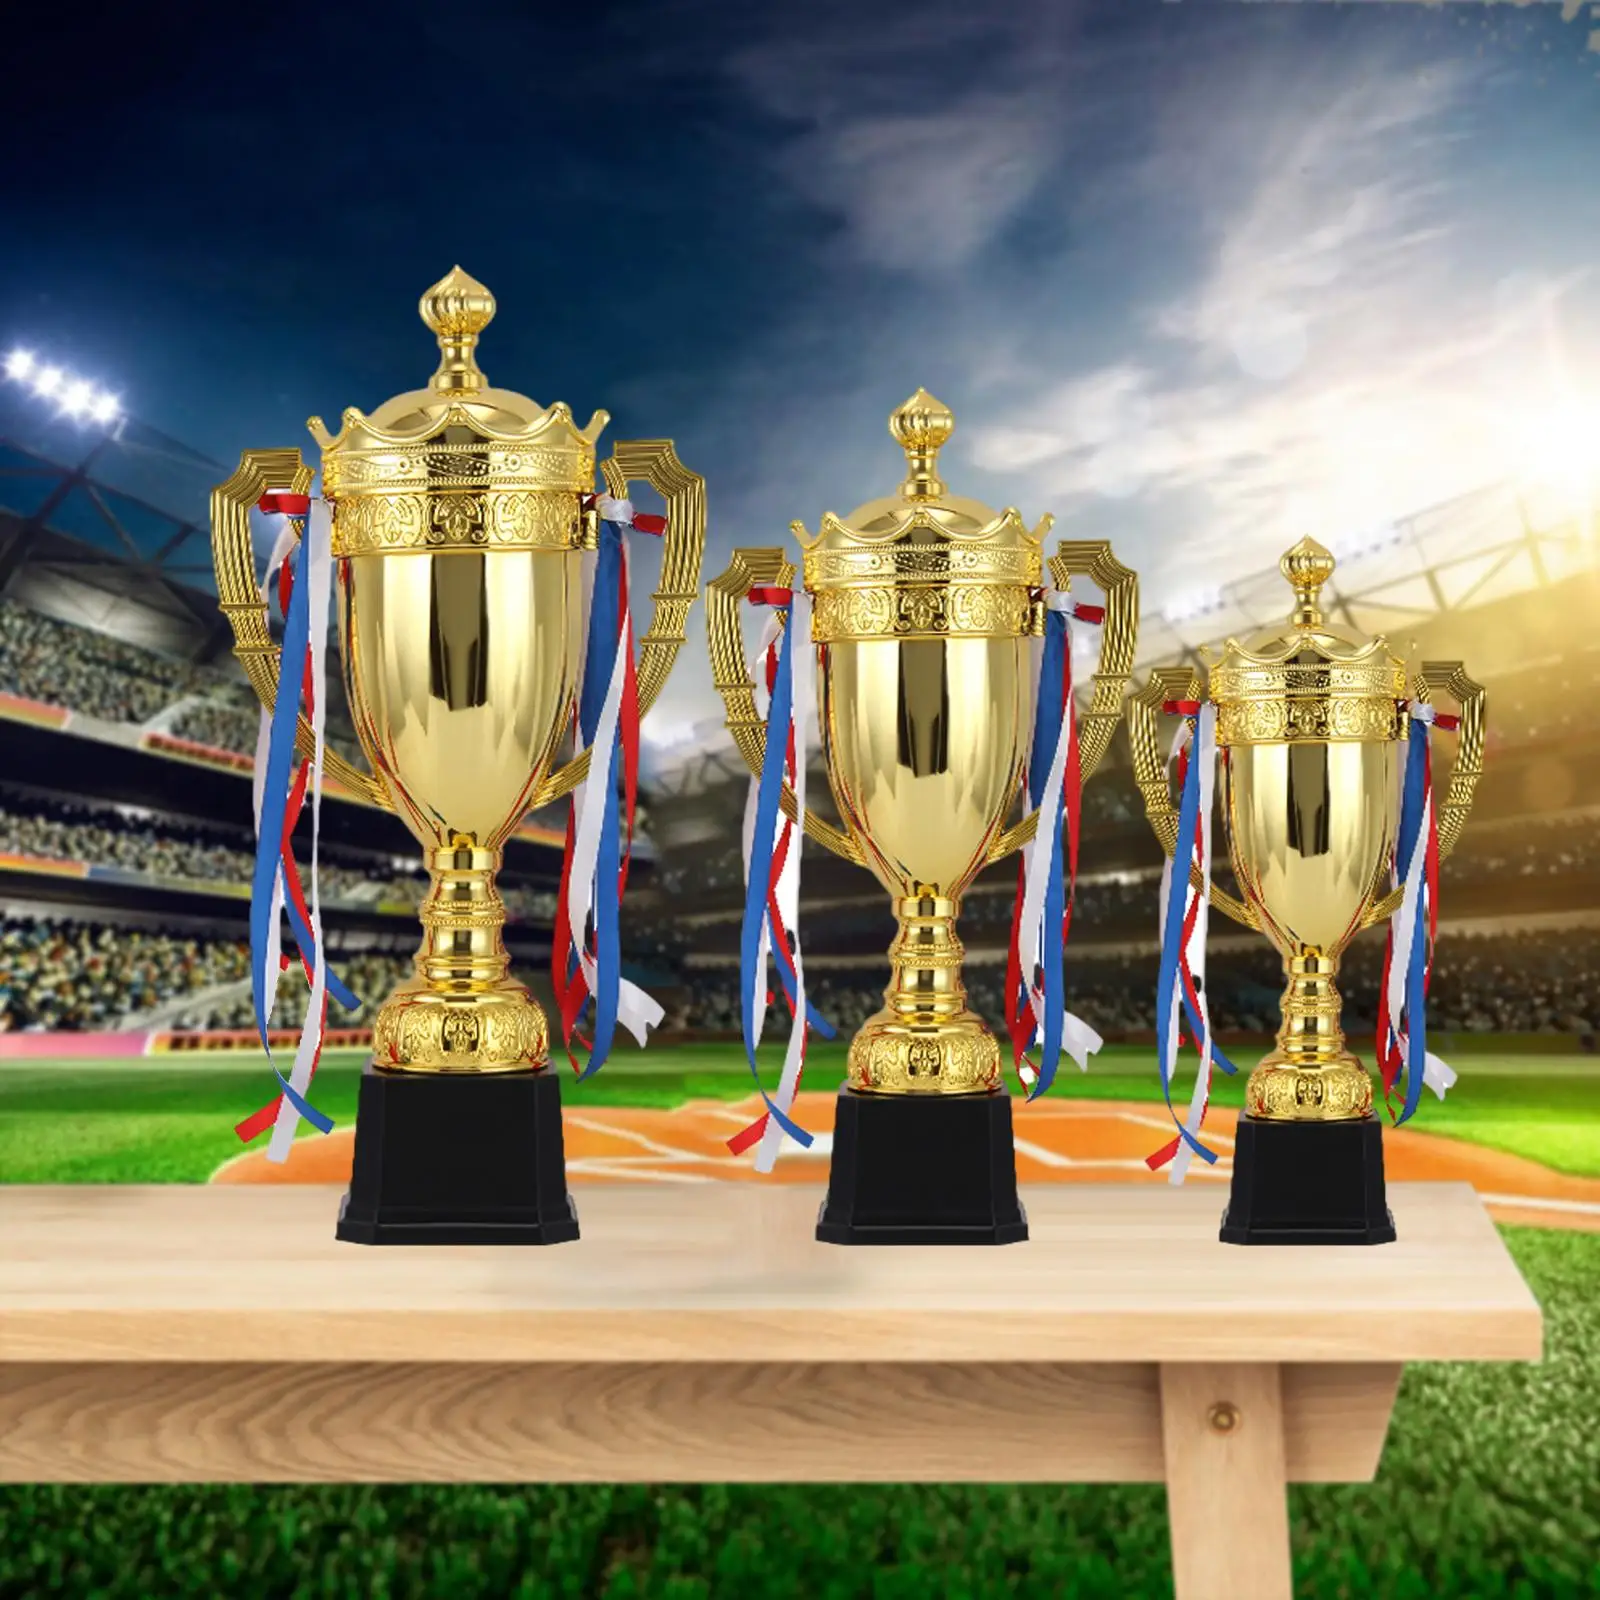 Award Trophy Cup Mini Trophy Awards Fashion Mini Trophy for Award Ceremonies Party Favors Football Basketball Sports Tournaments